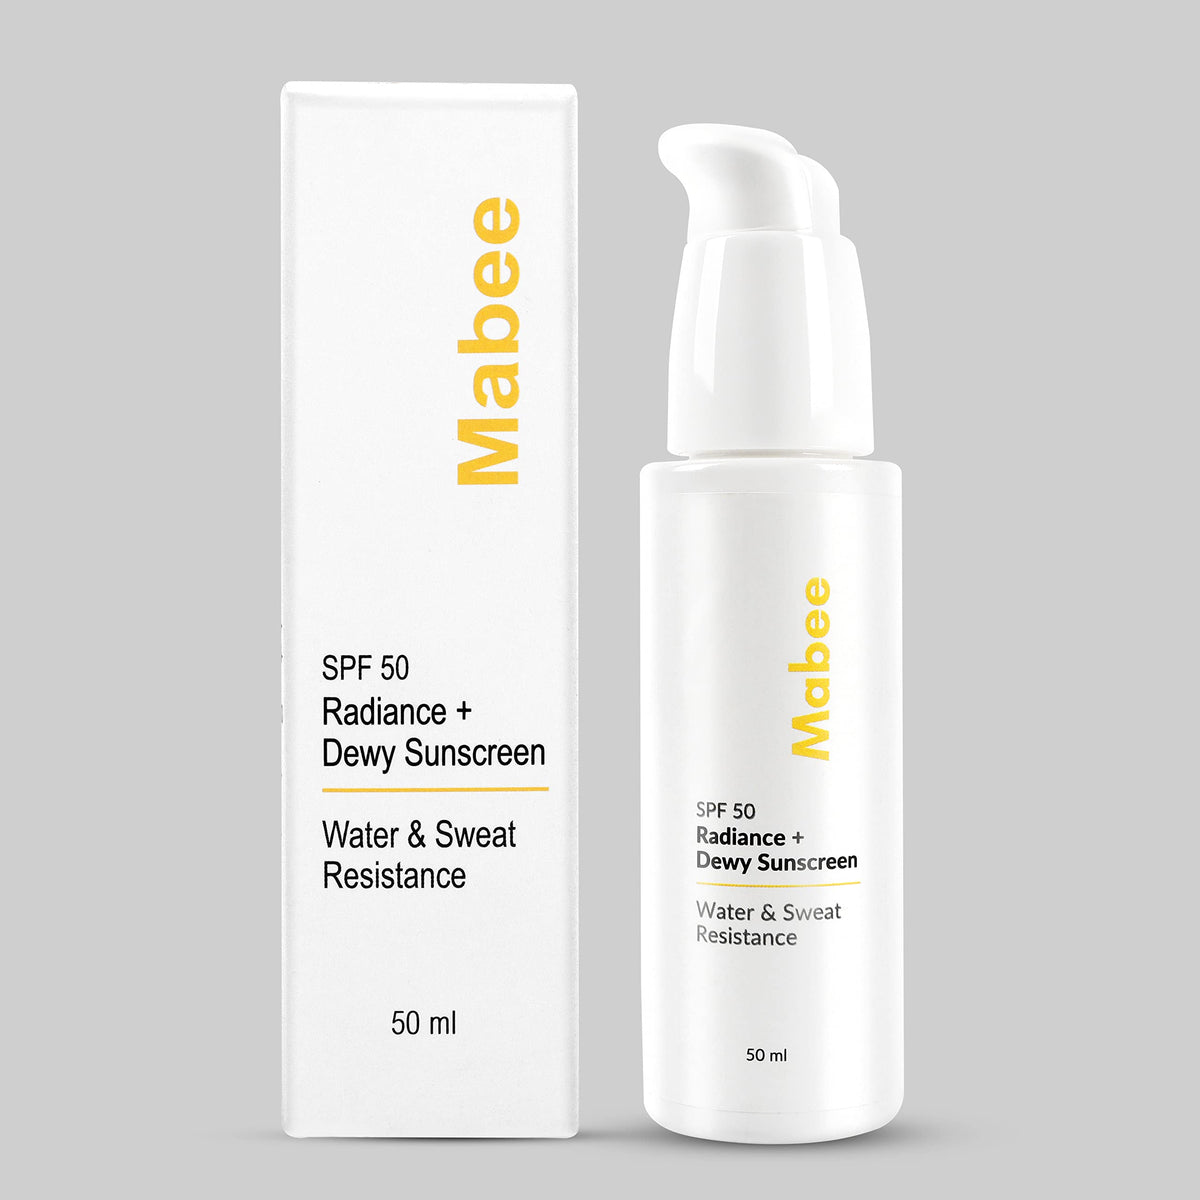 Mabee Cosmetic's Cream Sunscreen SPF 50 Lightweight With Multi-Vitamins, No White Cast, Broad Spectrum, non- sticky, Acne Safe For Unisex, 50g